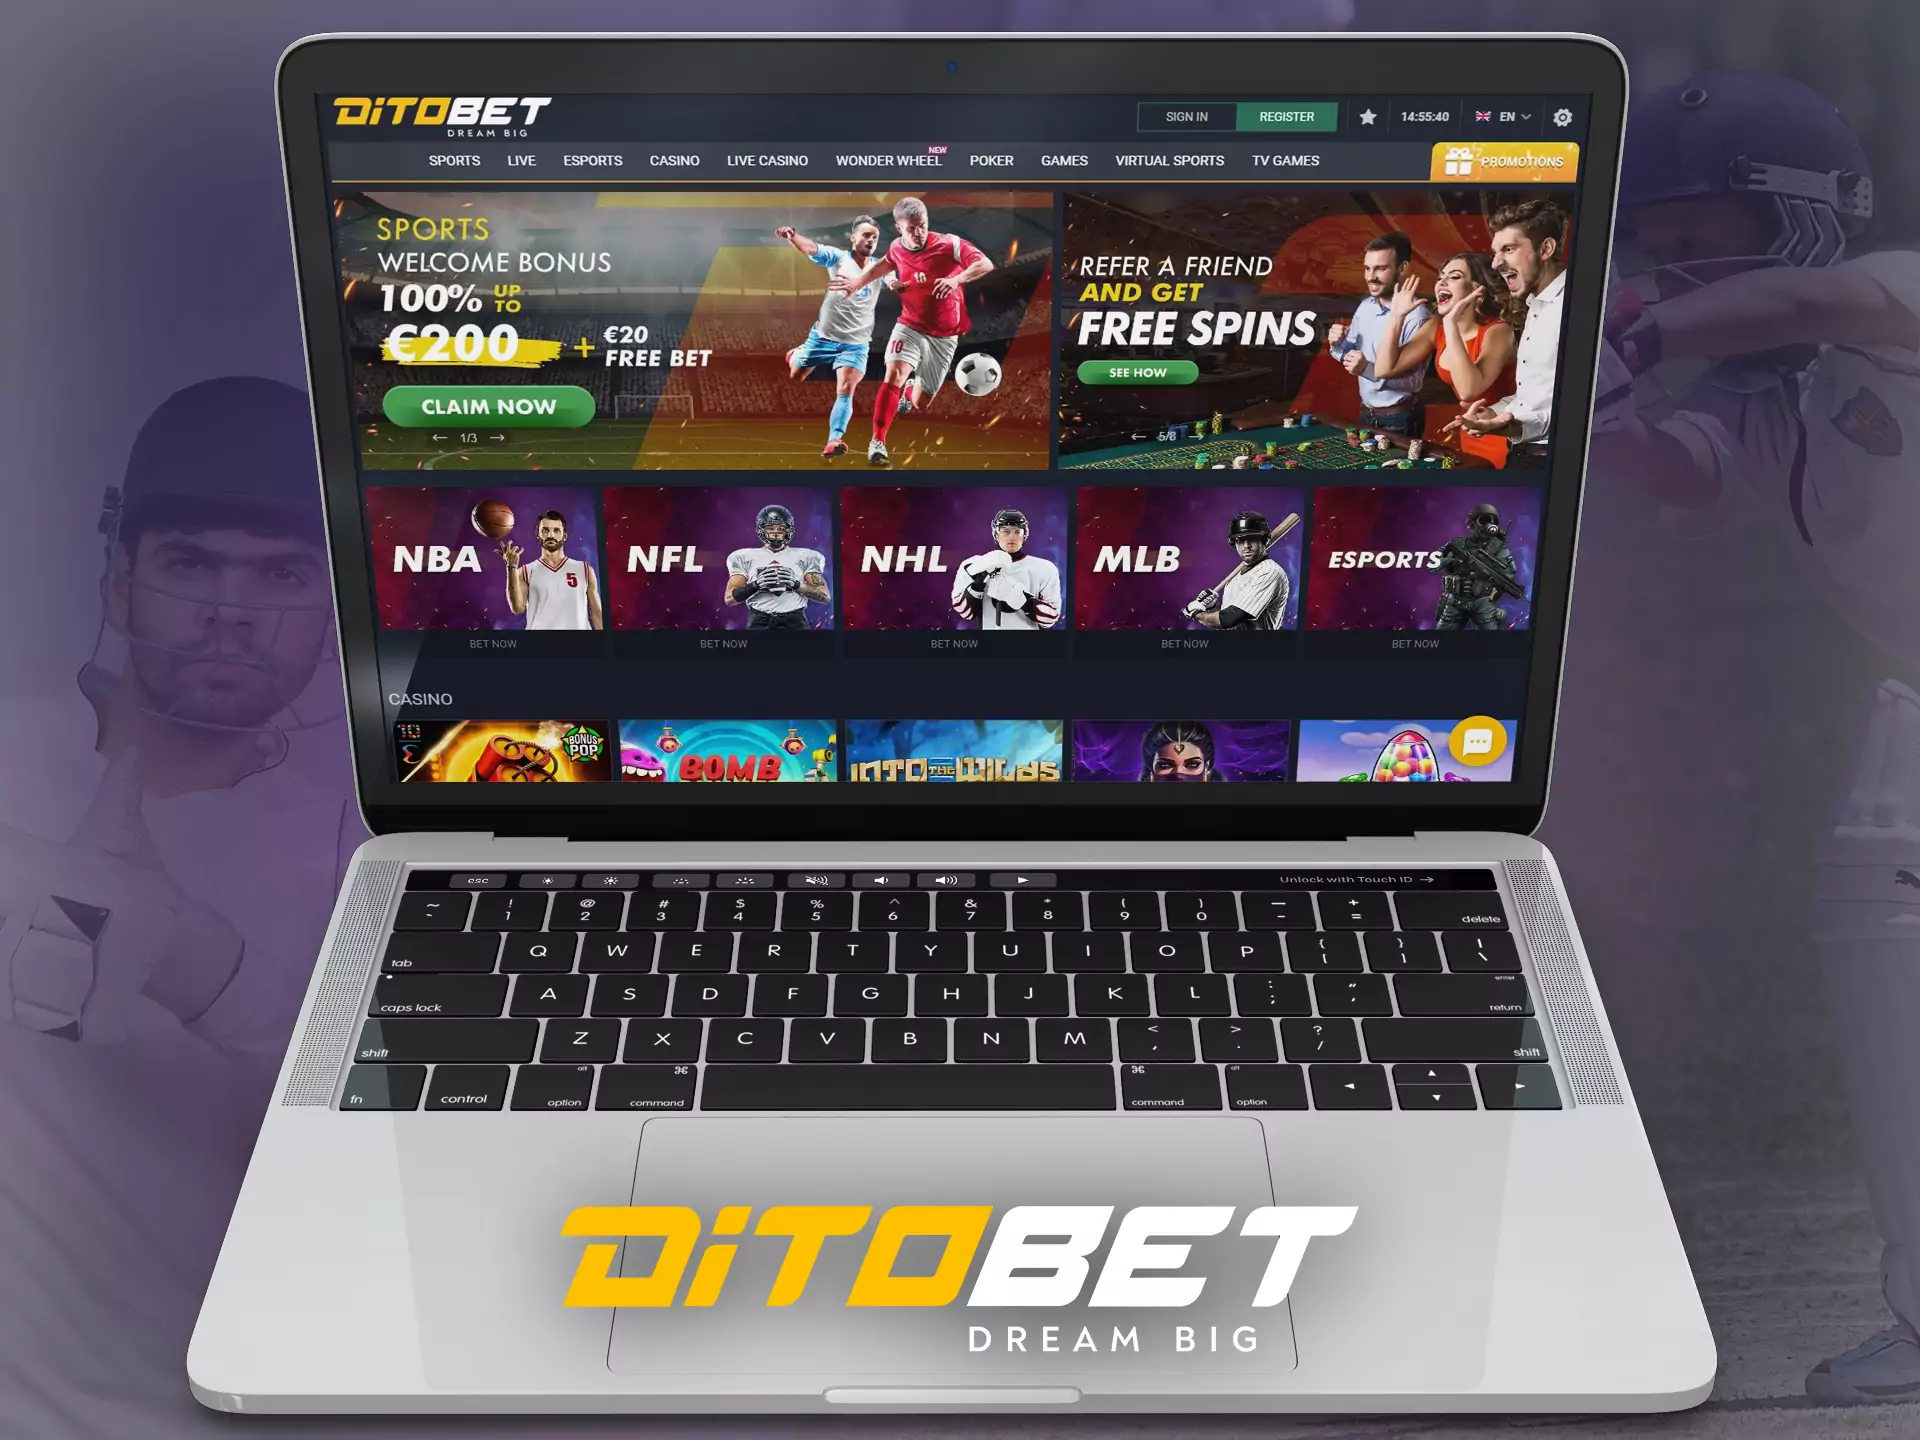 Use the official Ditobet website from your computer.